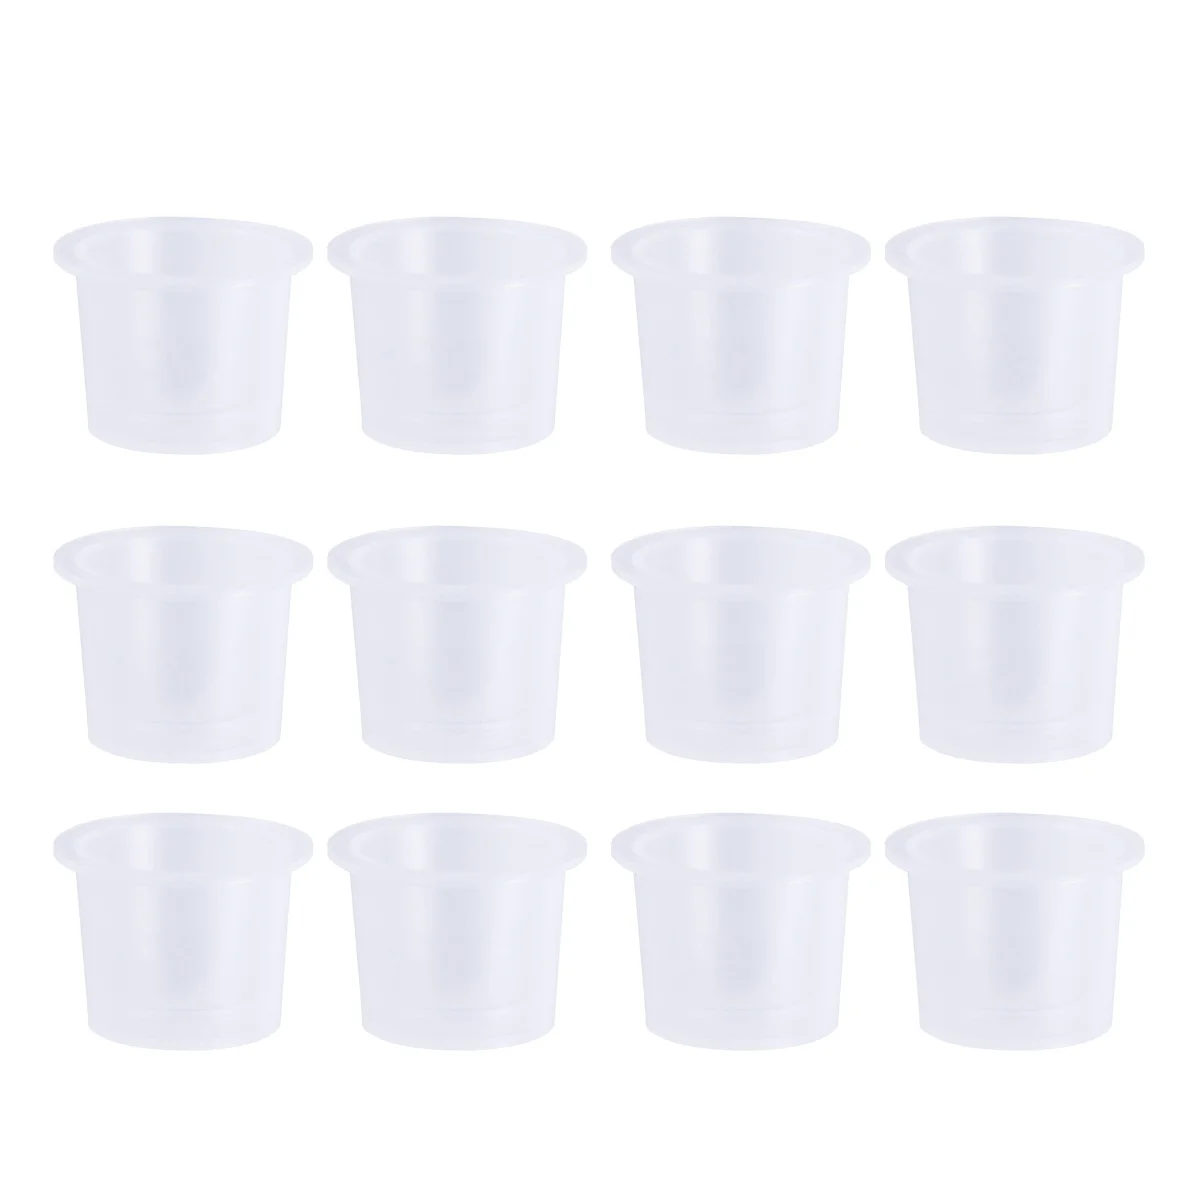 

100 Pcs Tattoo Cups Small White Ink Tattoo Pigment Holder Suite Ink Caps Tattooing Small Tattoo Ink Caps Small